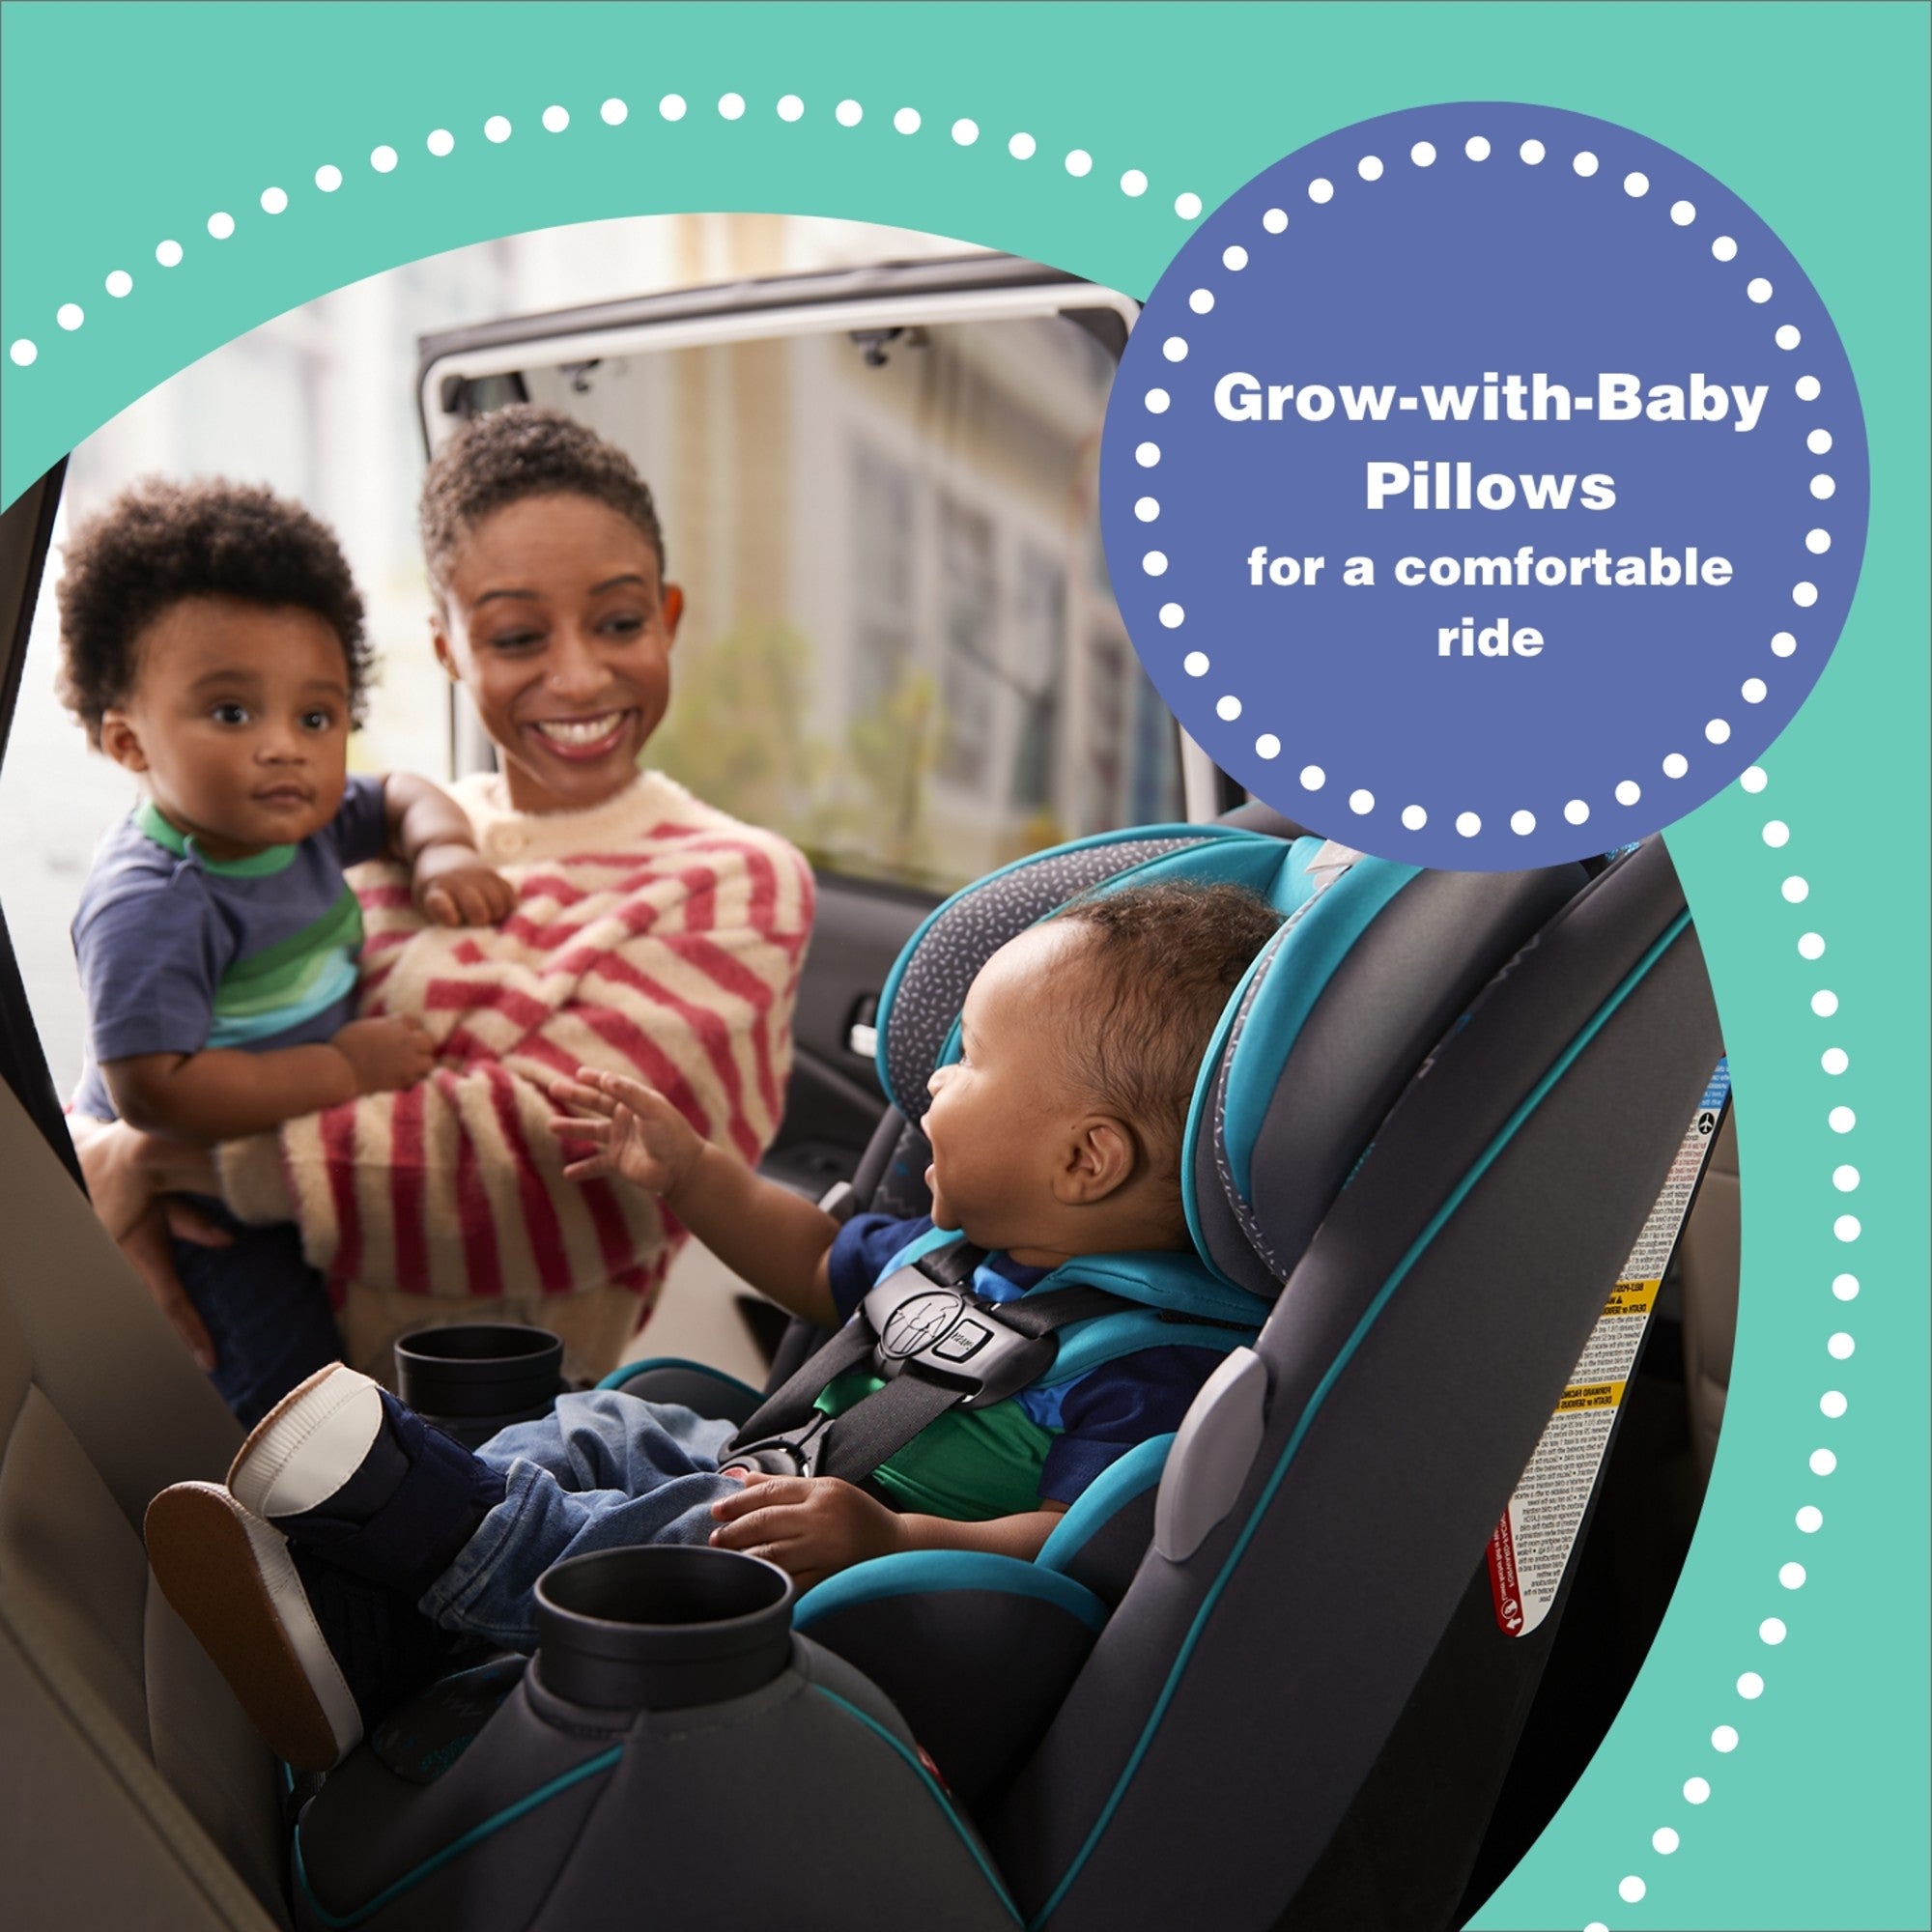 Disney Baby Grow and Go™ All-in-One Convertible Car Seat - QuickFit Harness for easy adjustment of both harness and headrest in 1 simple step